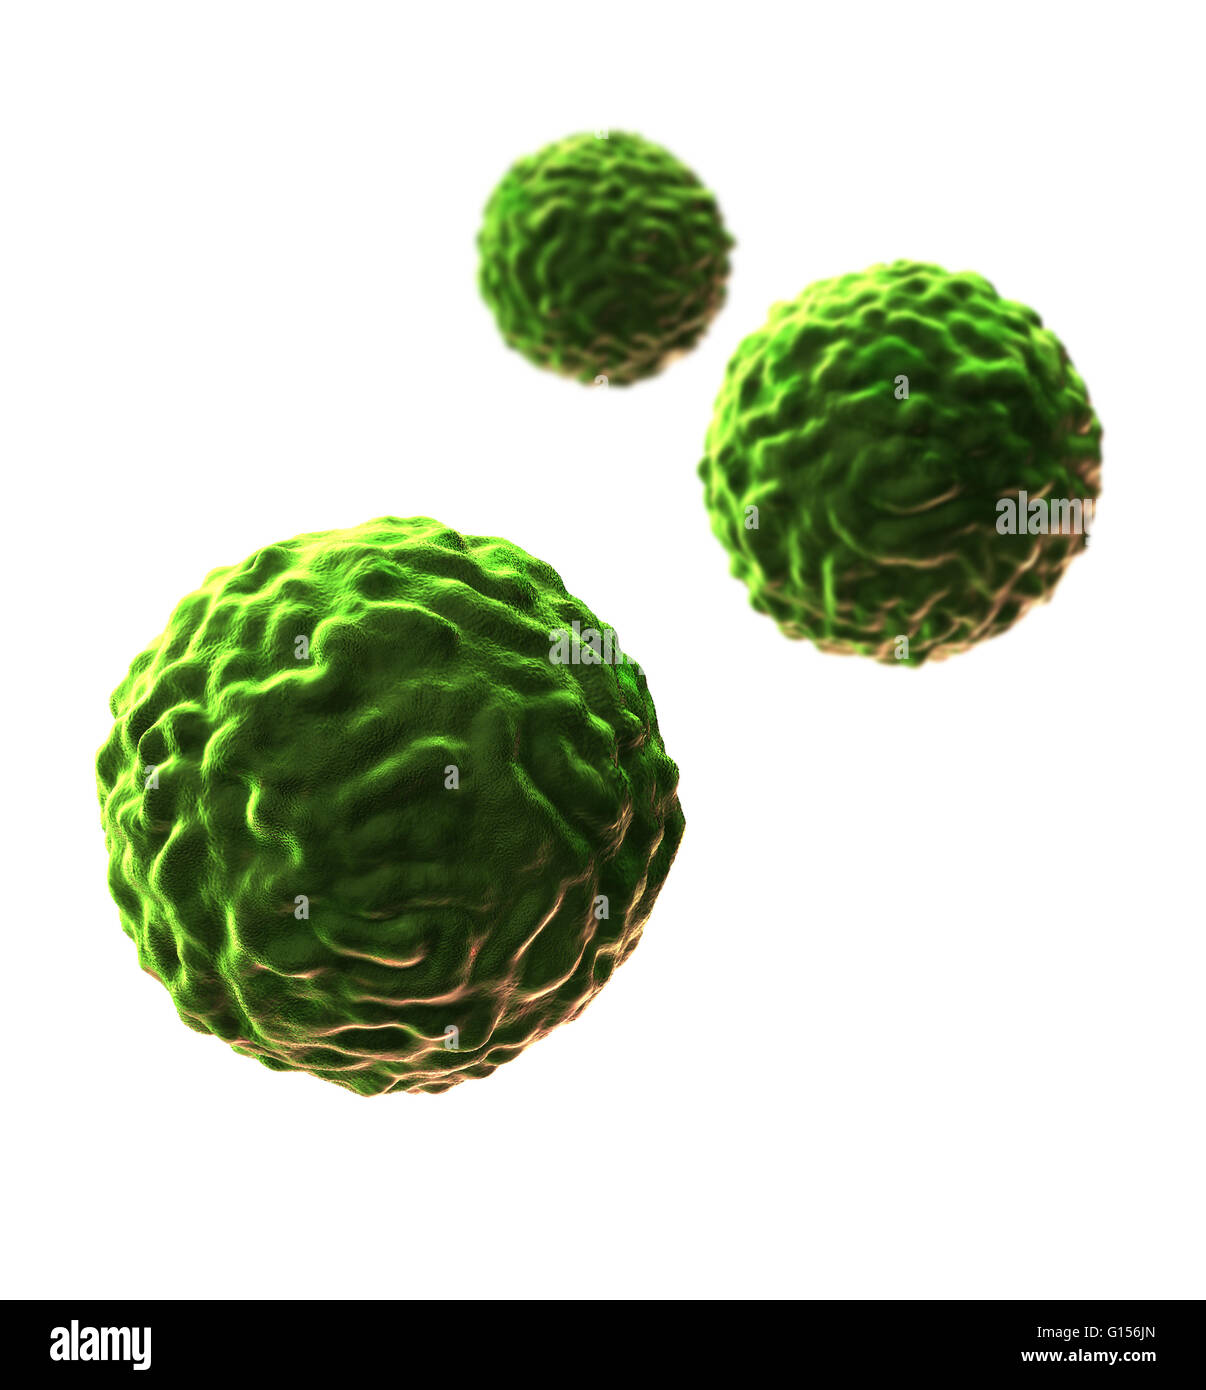 Illustration of stem cells. Stem cells can differentiate into any other cell type. There are three main types of mammalian stem cell: embryonic stem cells, derived from blastocysts; adult stem cells, which are found in some adult tissues; and cord blood s Stock Photo